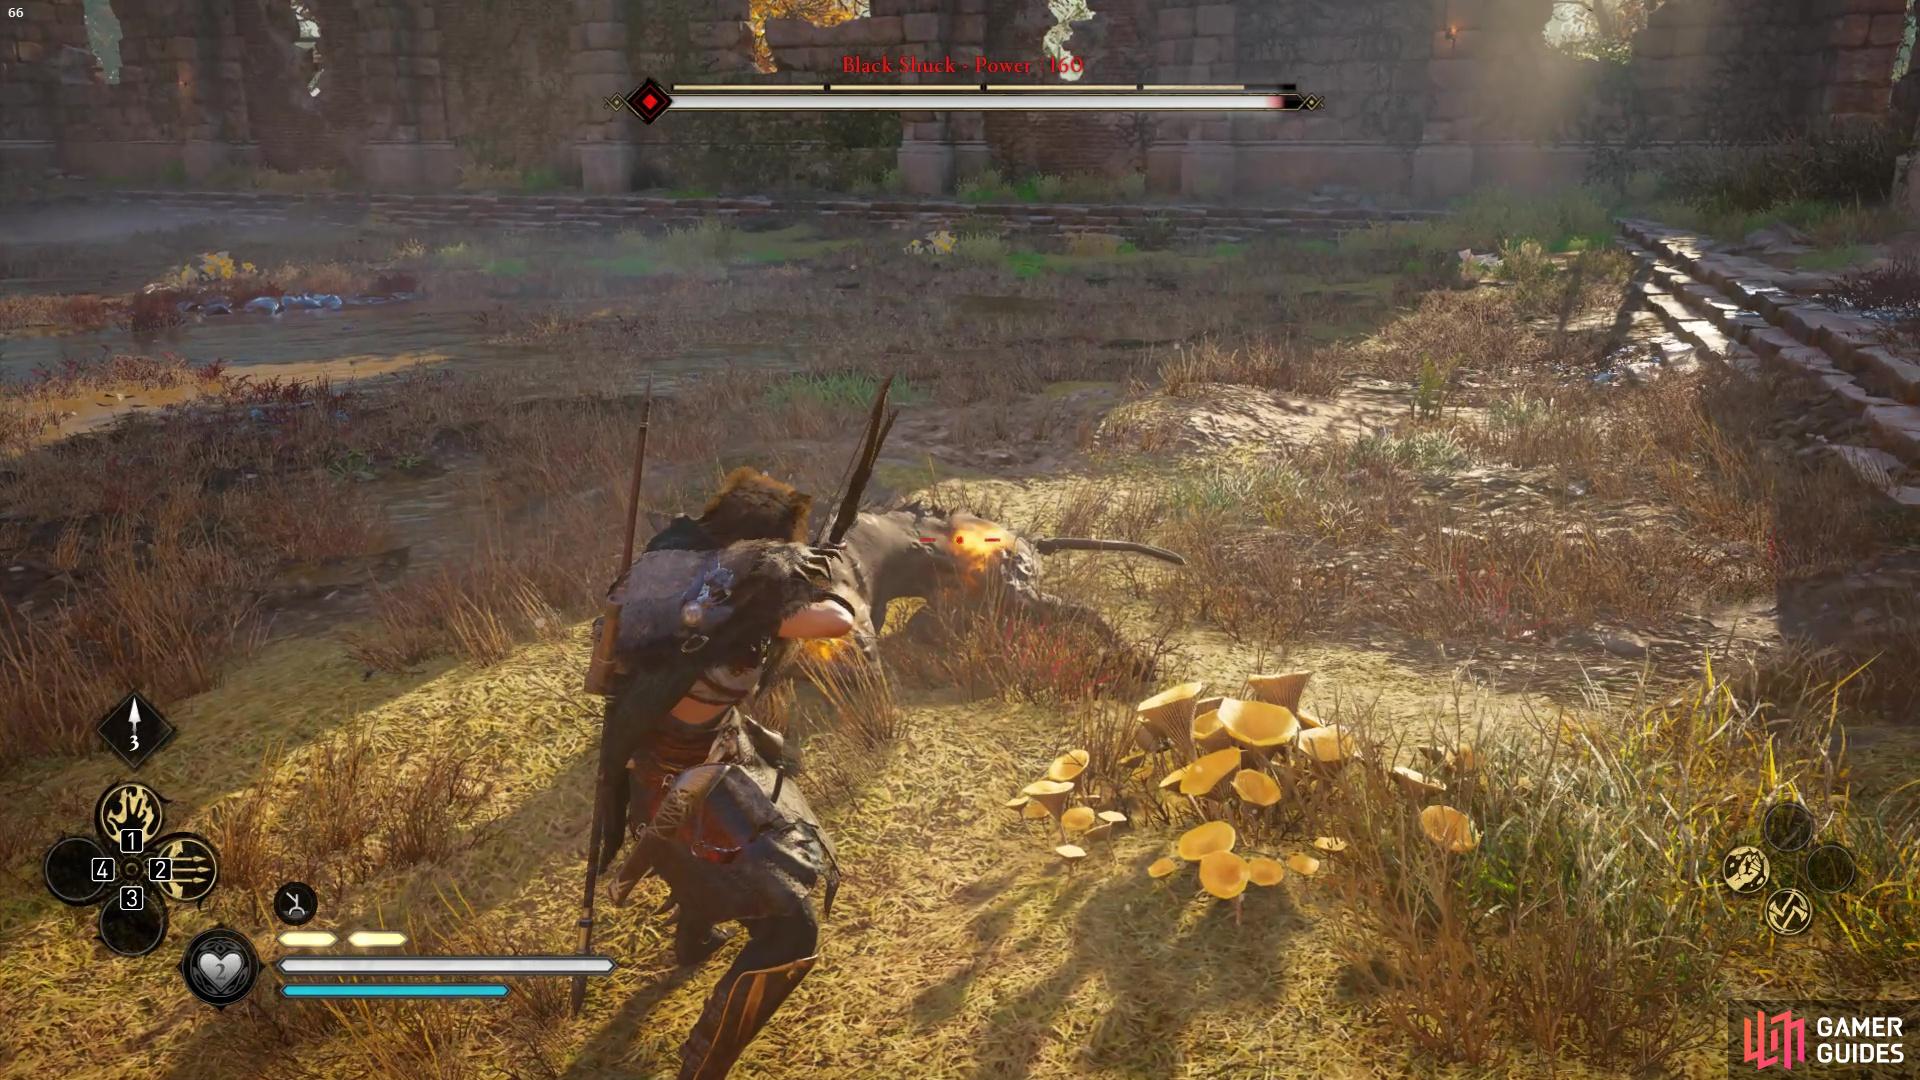 Shoot the Black Shucks weak points whilst its stunned to deplete its stamina bar